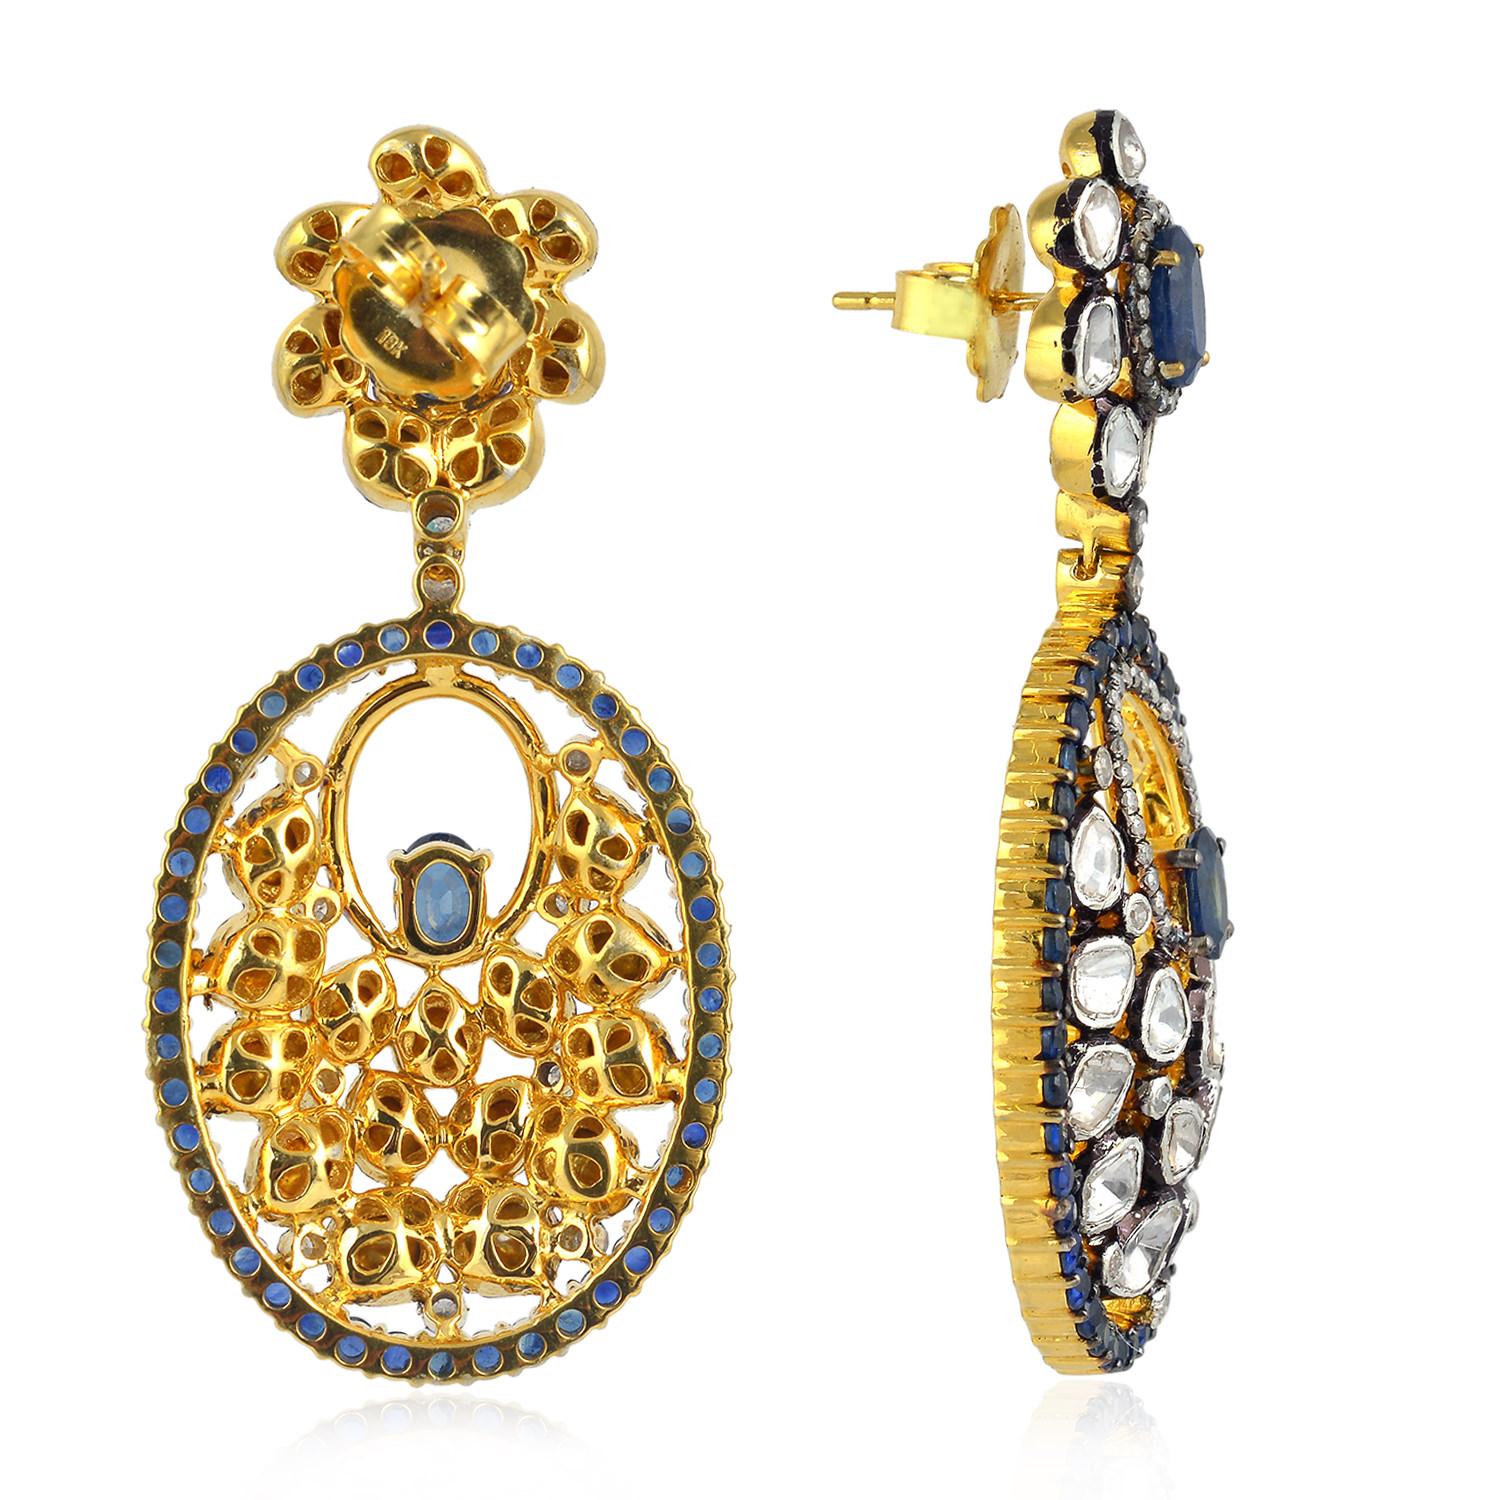 Inspired by the Mughal Era & Royal heritage these stunning earrings are handcrafted in 18-karat gold & sterling silver.  They have a chandelier-style silhouette that's encrusted with 7.87 carats blue sapphire and 7.13 carats rose cut diamonds with